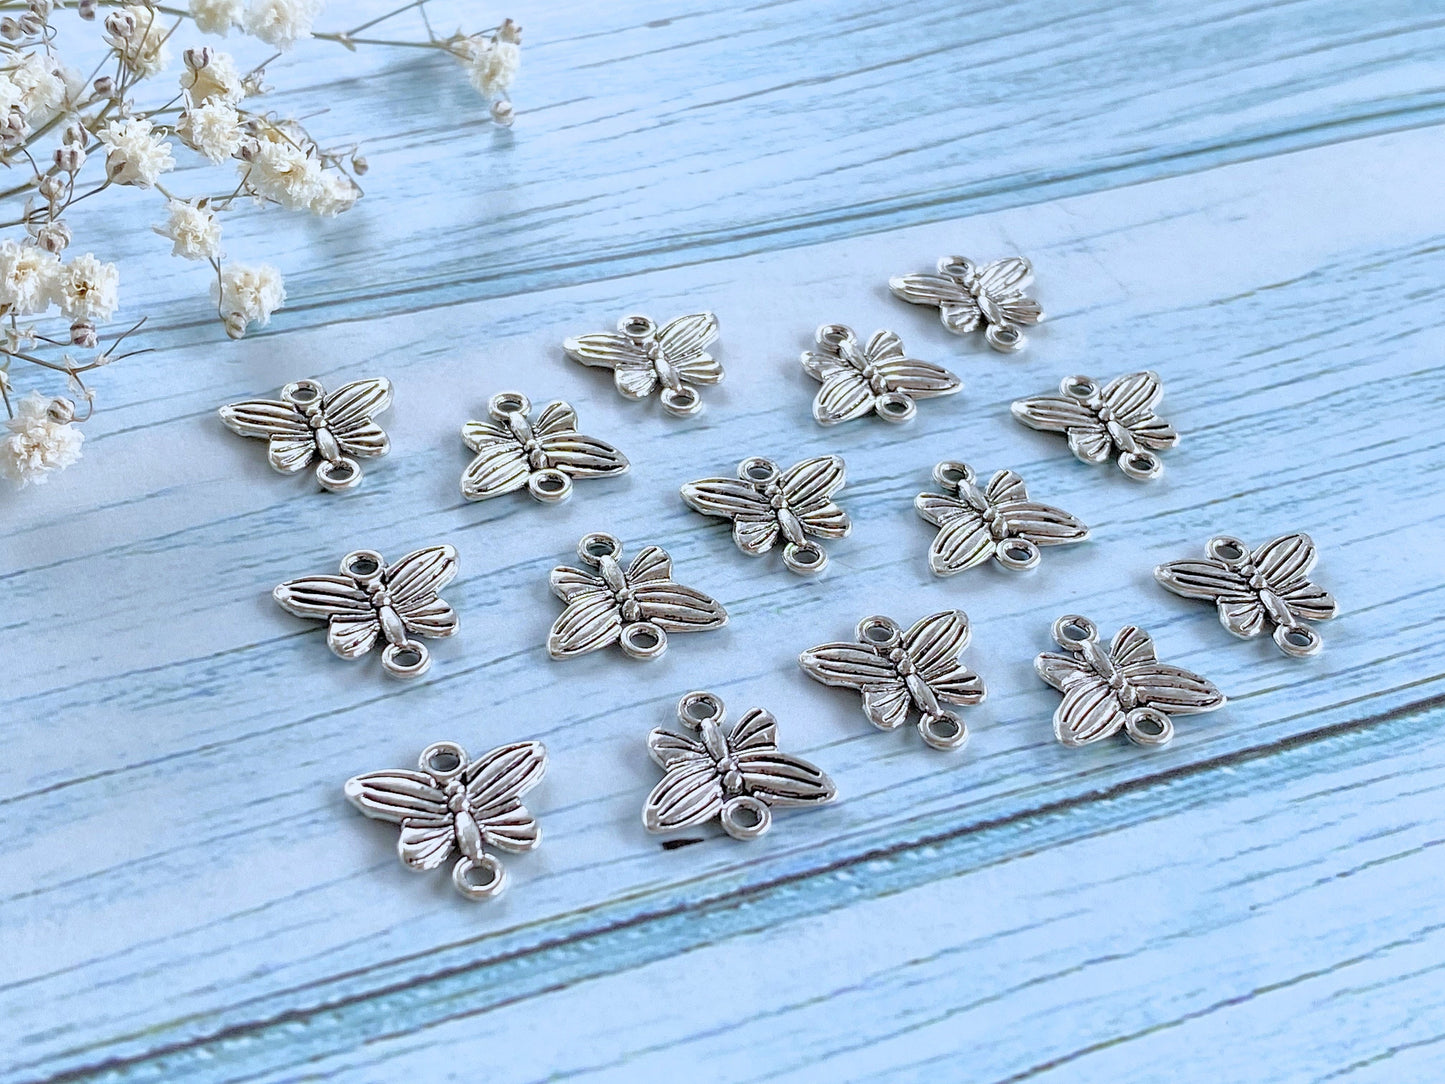 Filigree 4pcs Mini Butterfly Charms Jewelry Connectors Vialysa